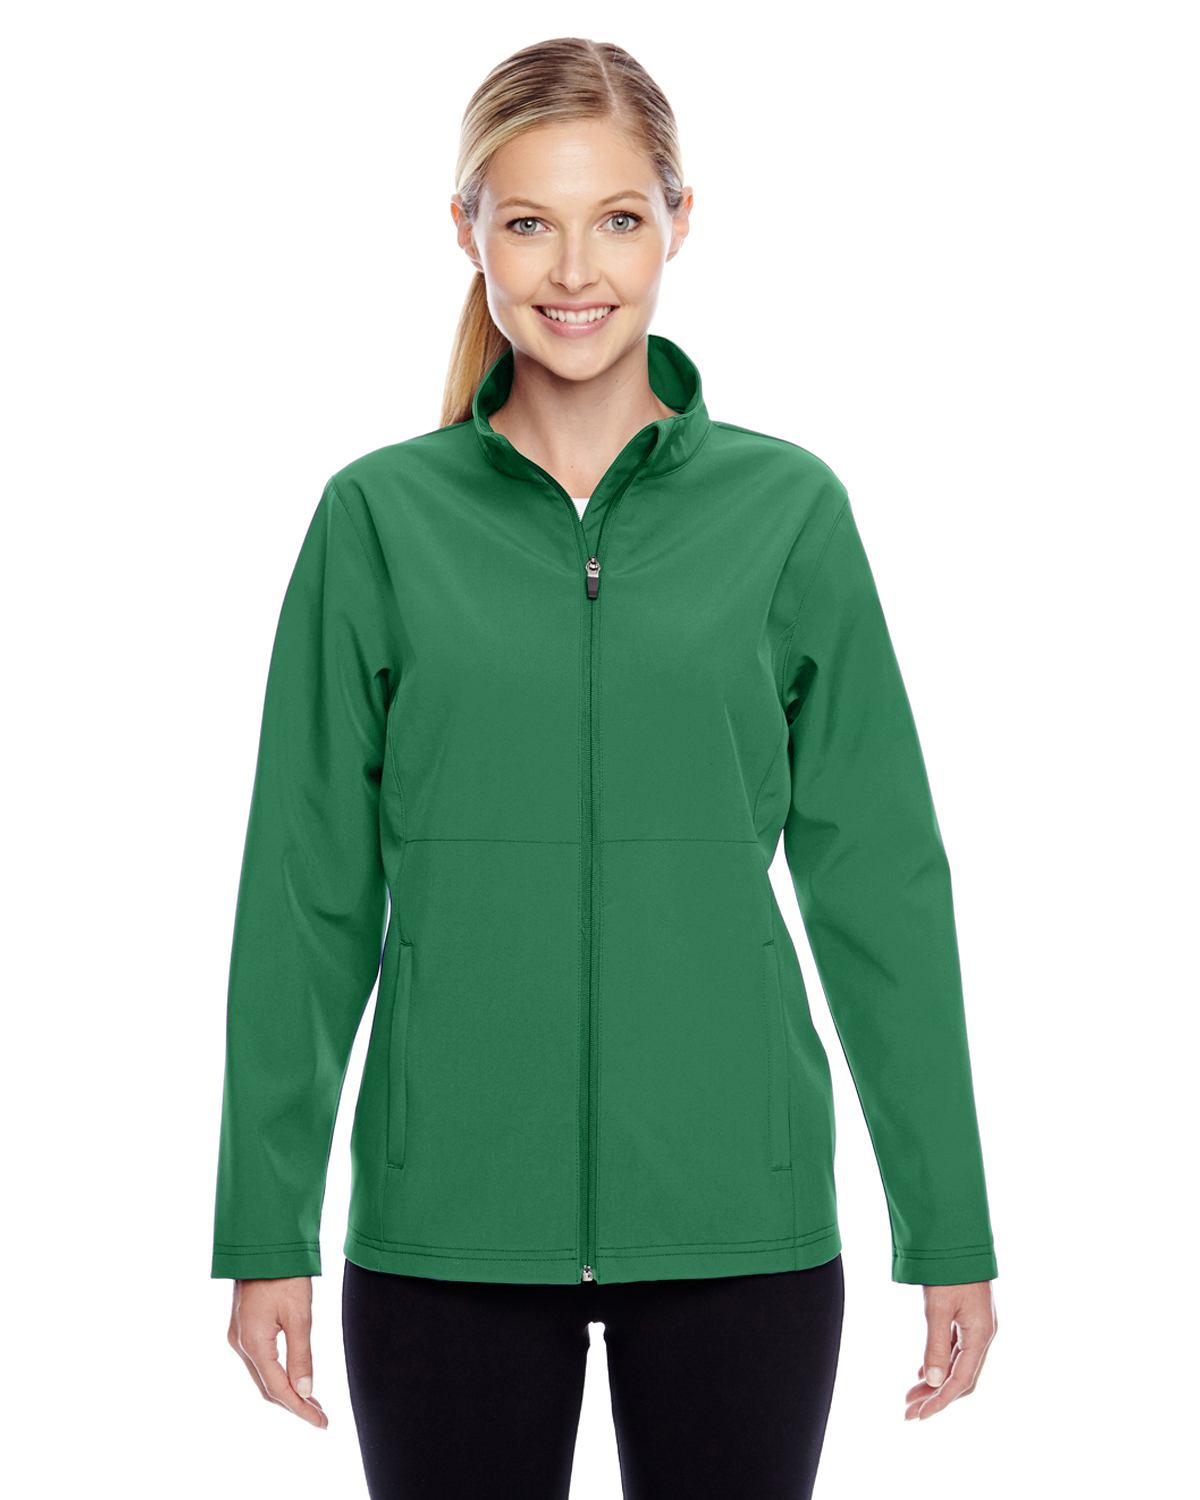 click to view SPORT DARK GREEN